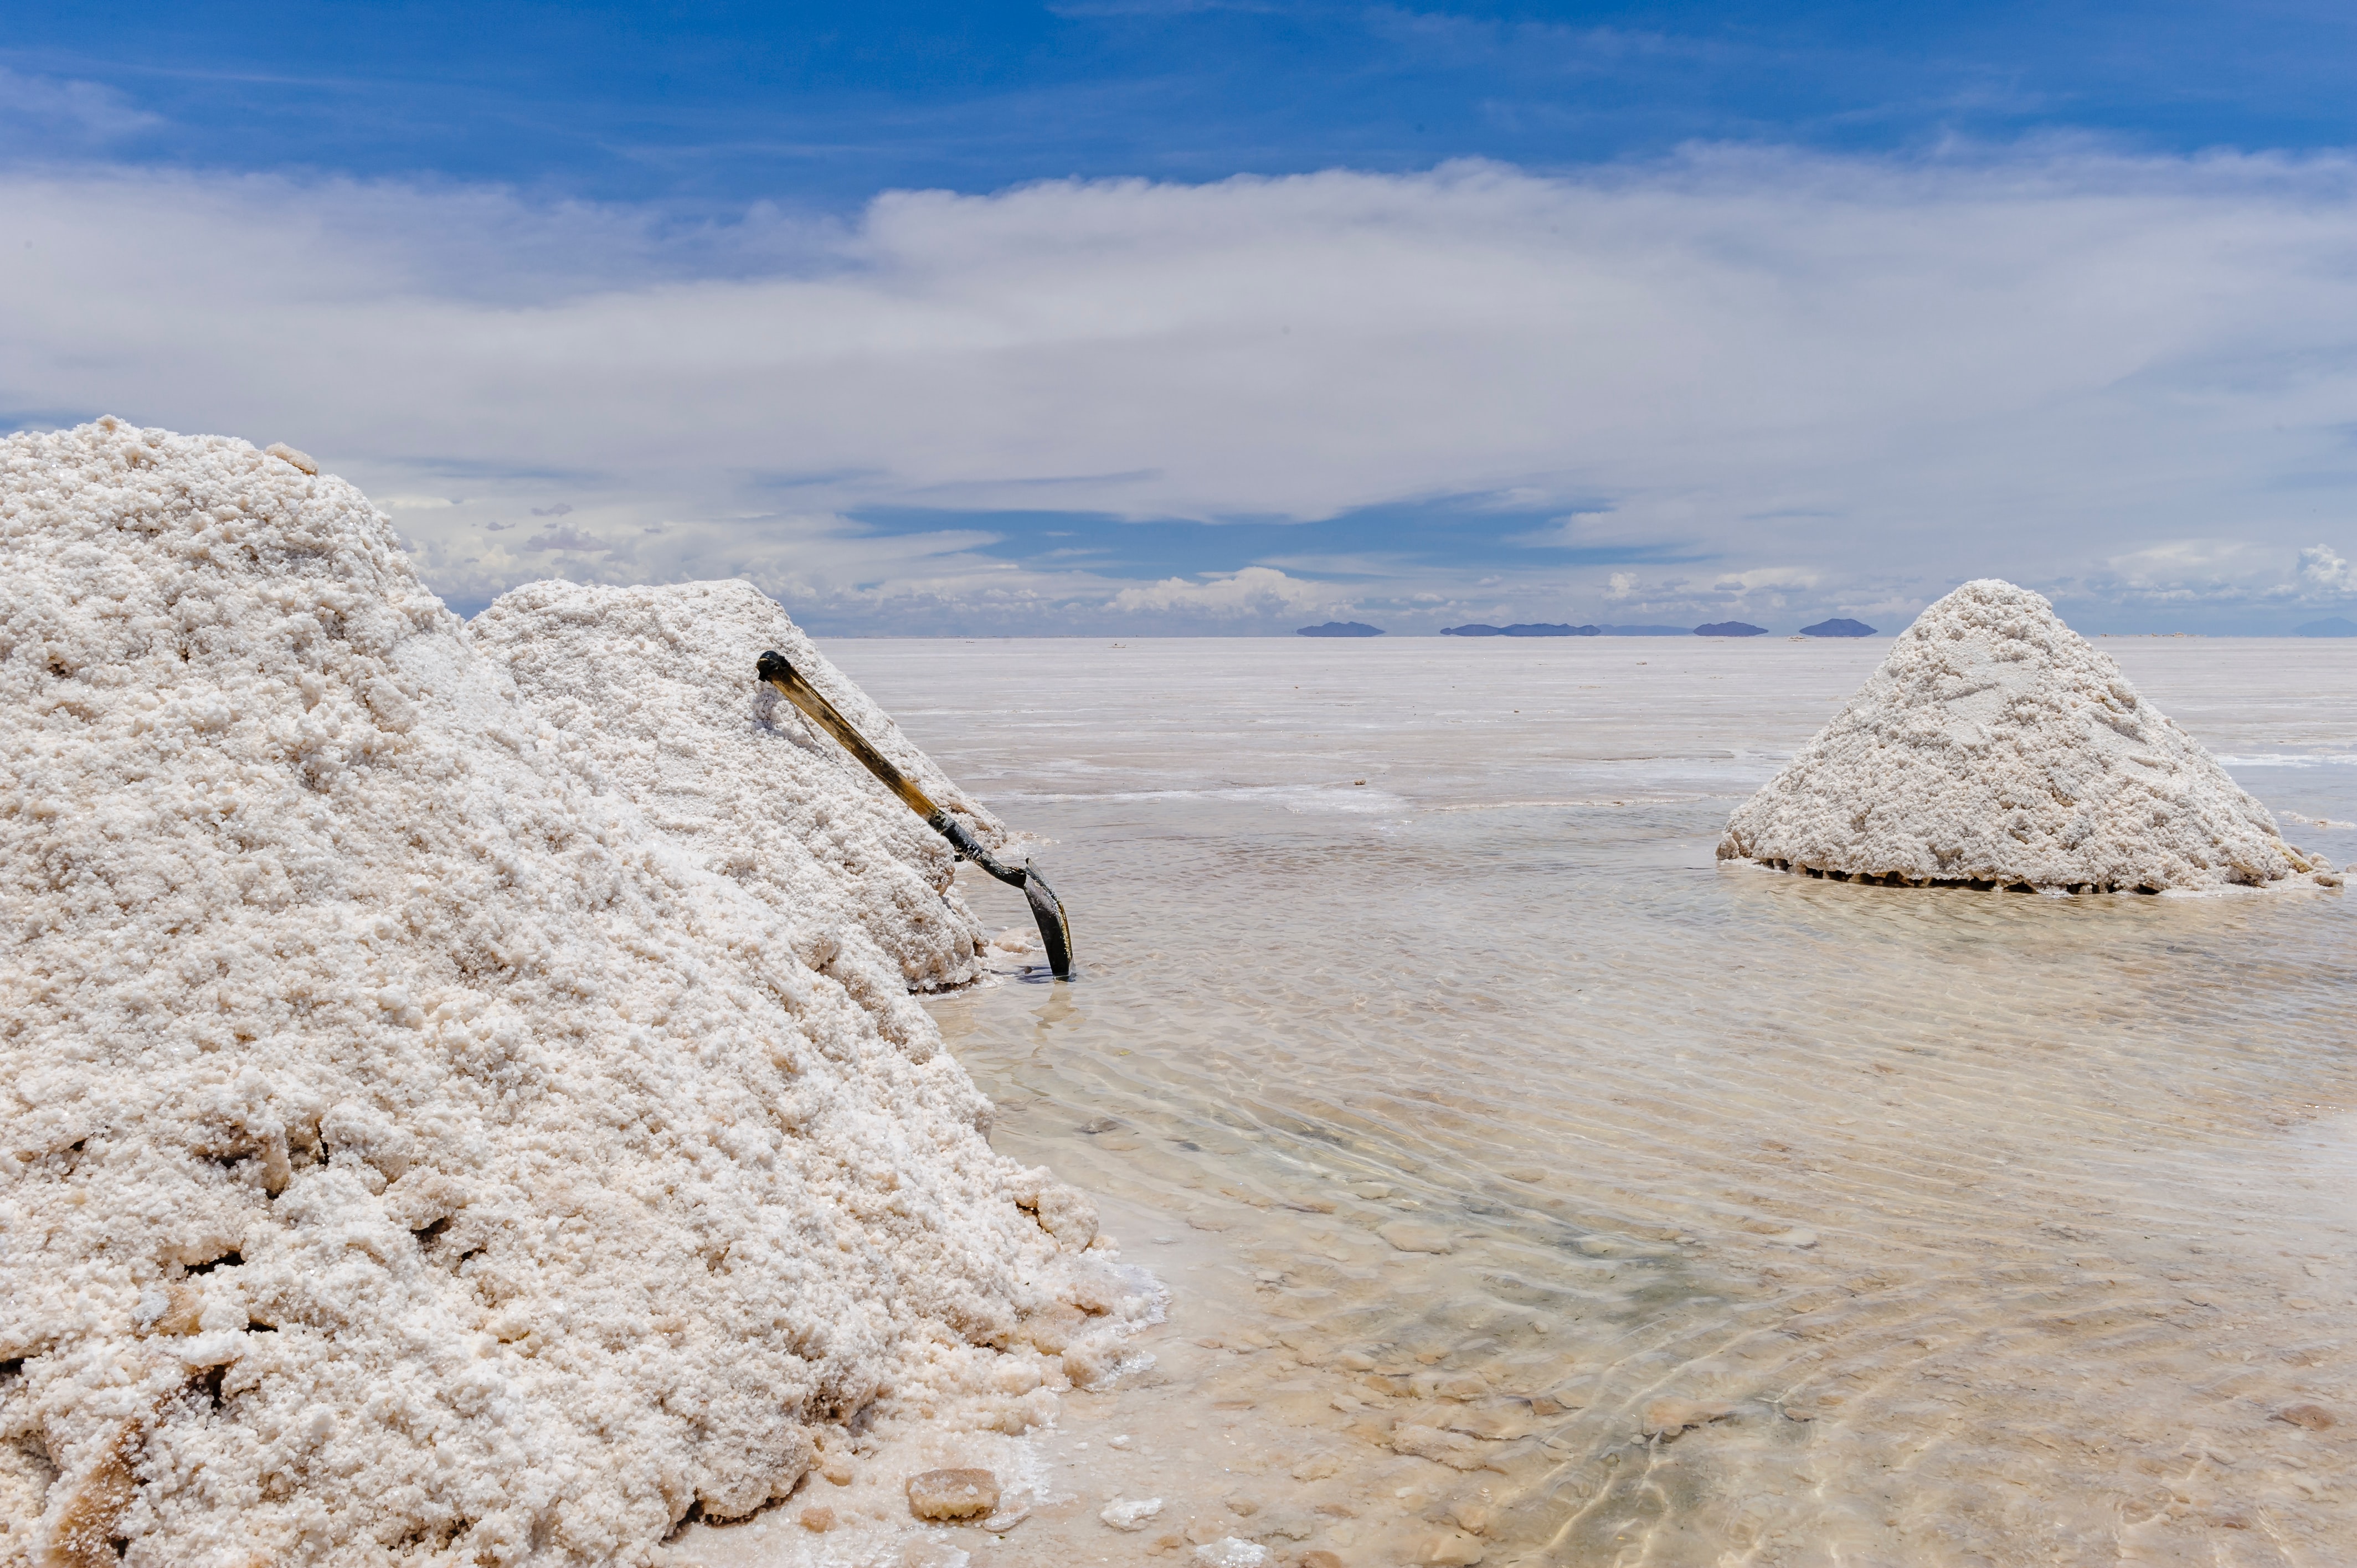 Where does lithium come from?